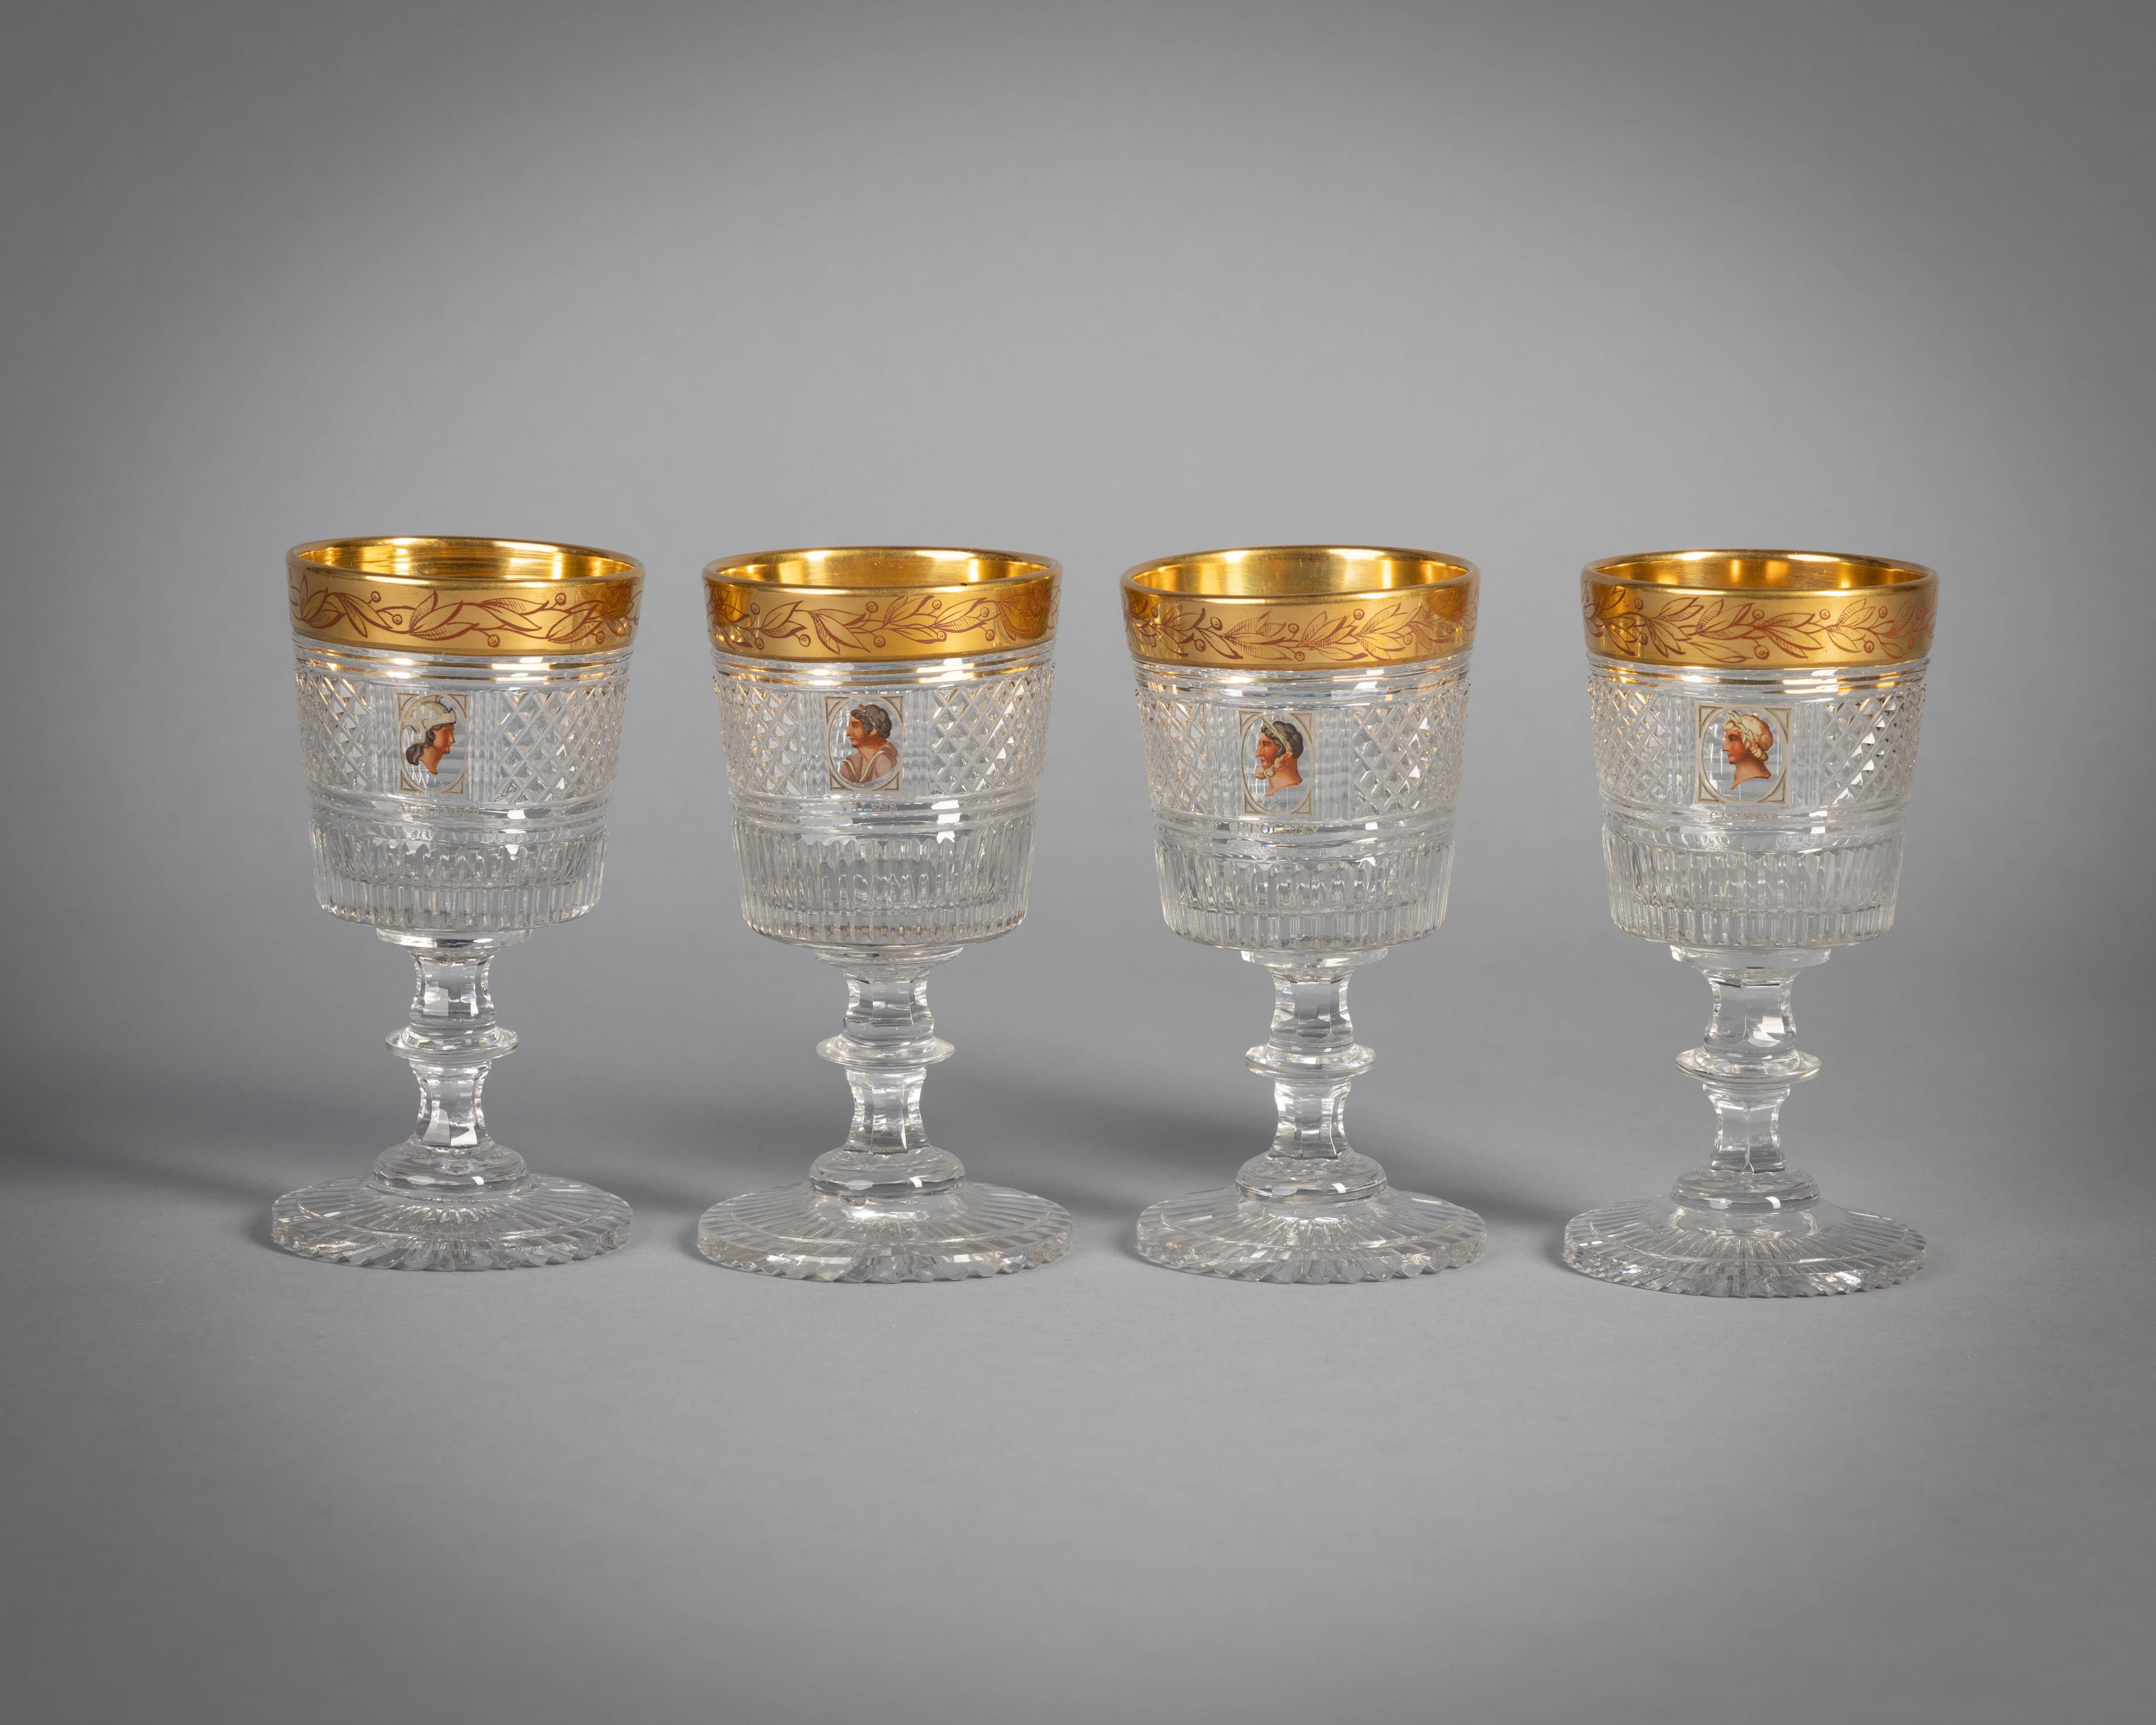 Extensive English Faceted and Enameled and Gilt Glass Service, circa 1815 For Sale 1